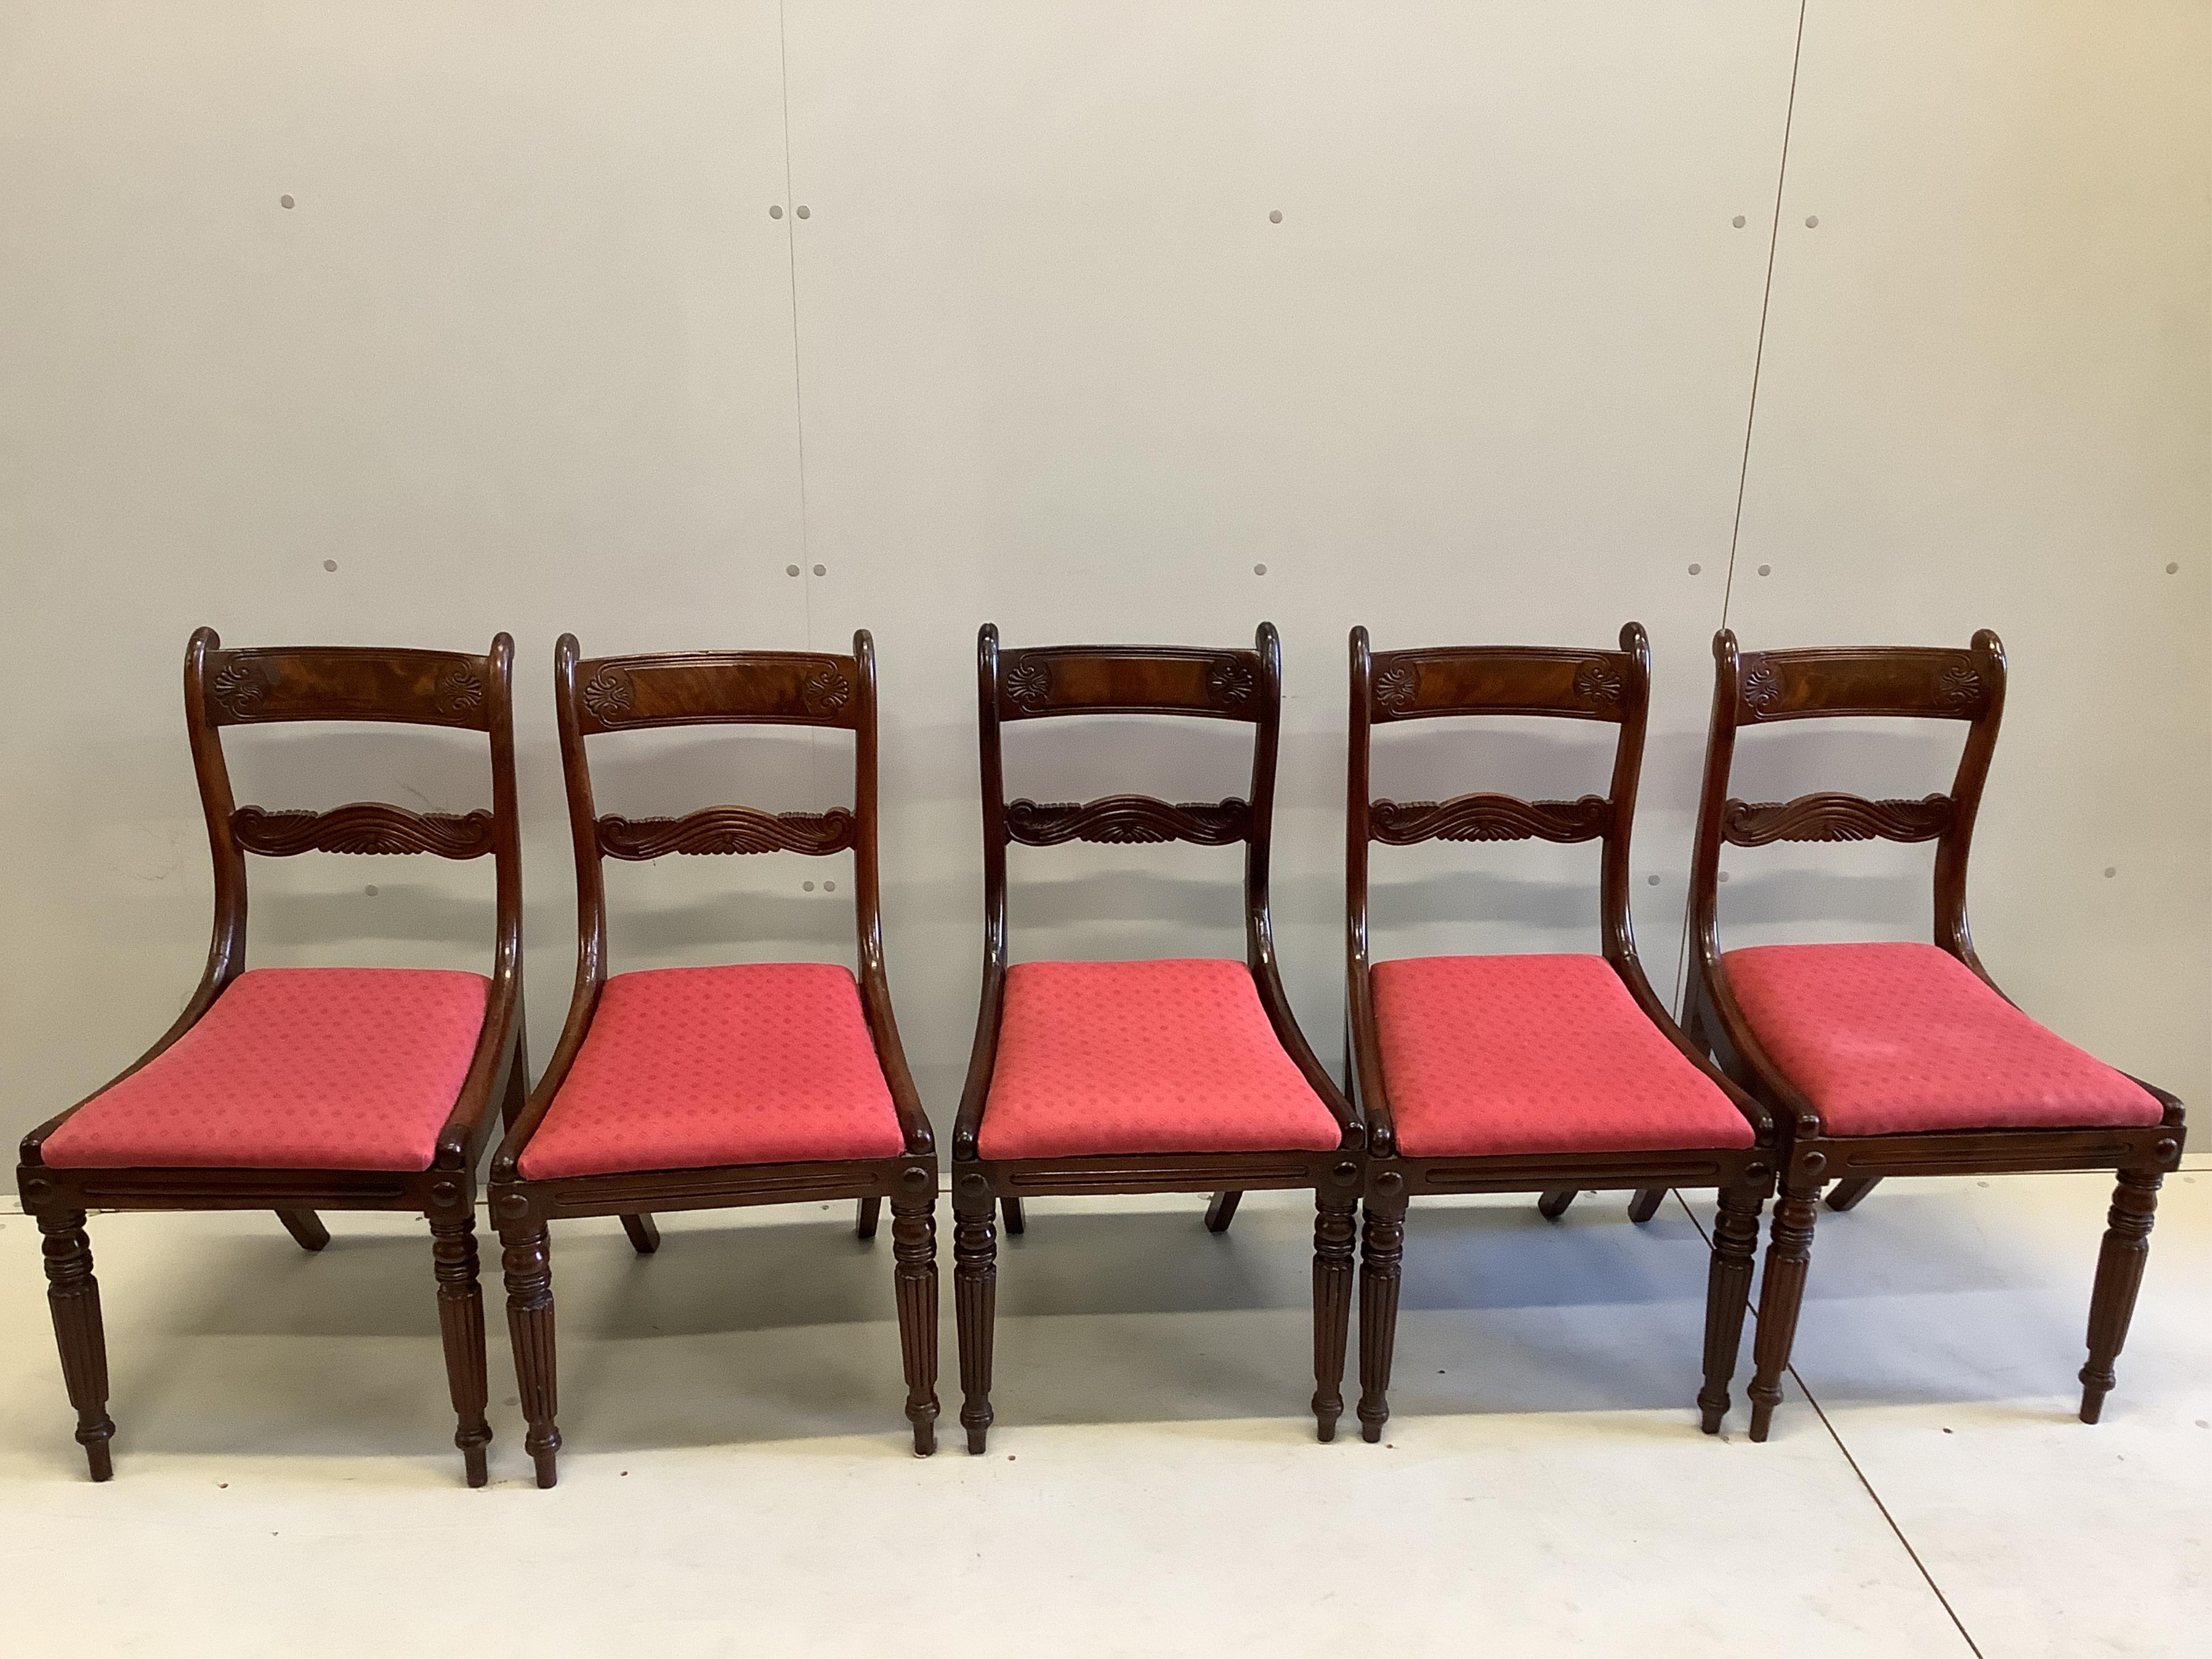 A set of five Regency mahogany dining chairs, width 45cm, depth 43cm, height 86cm